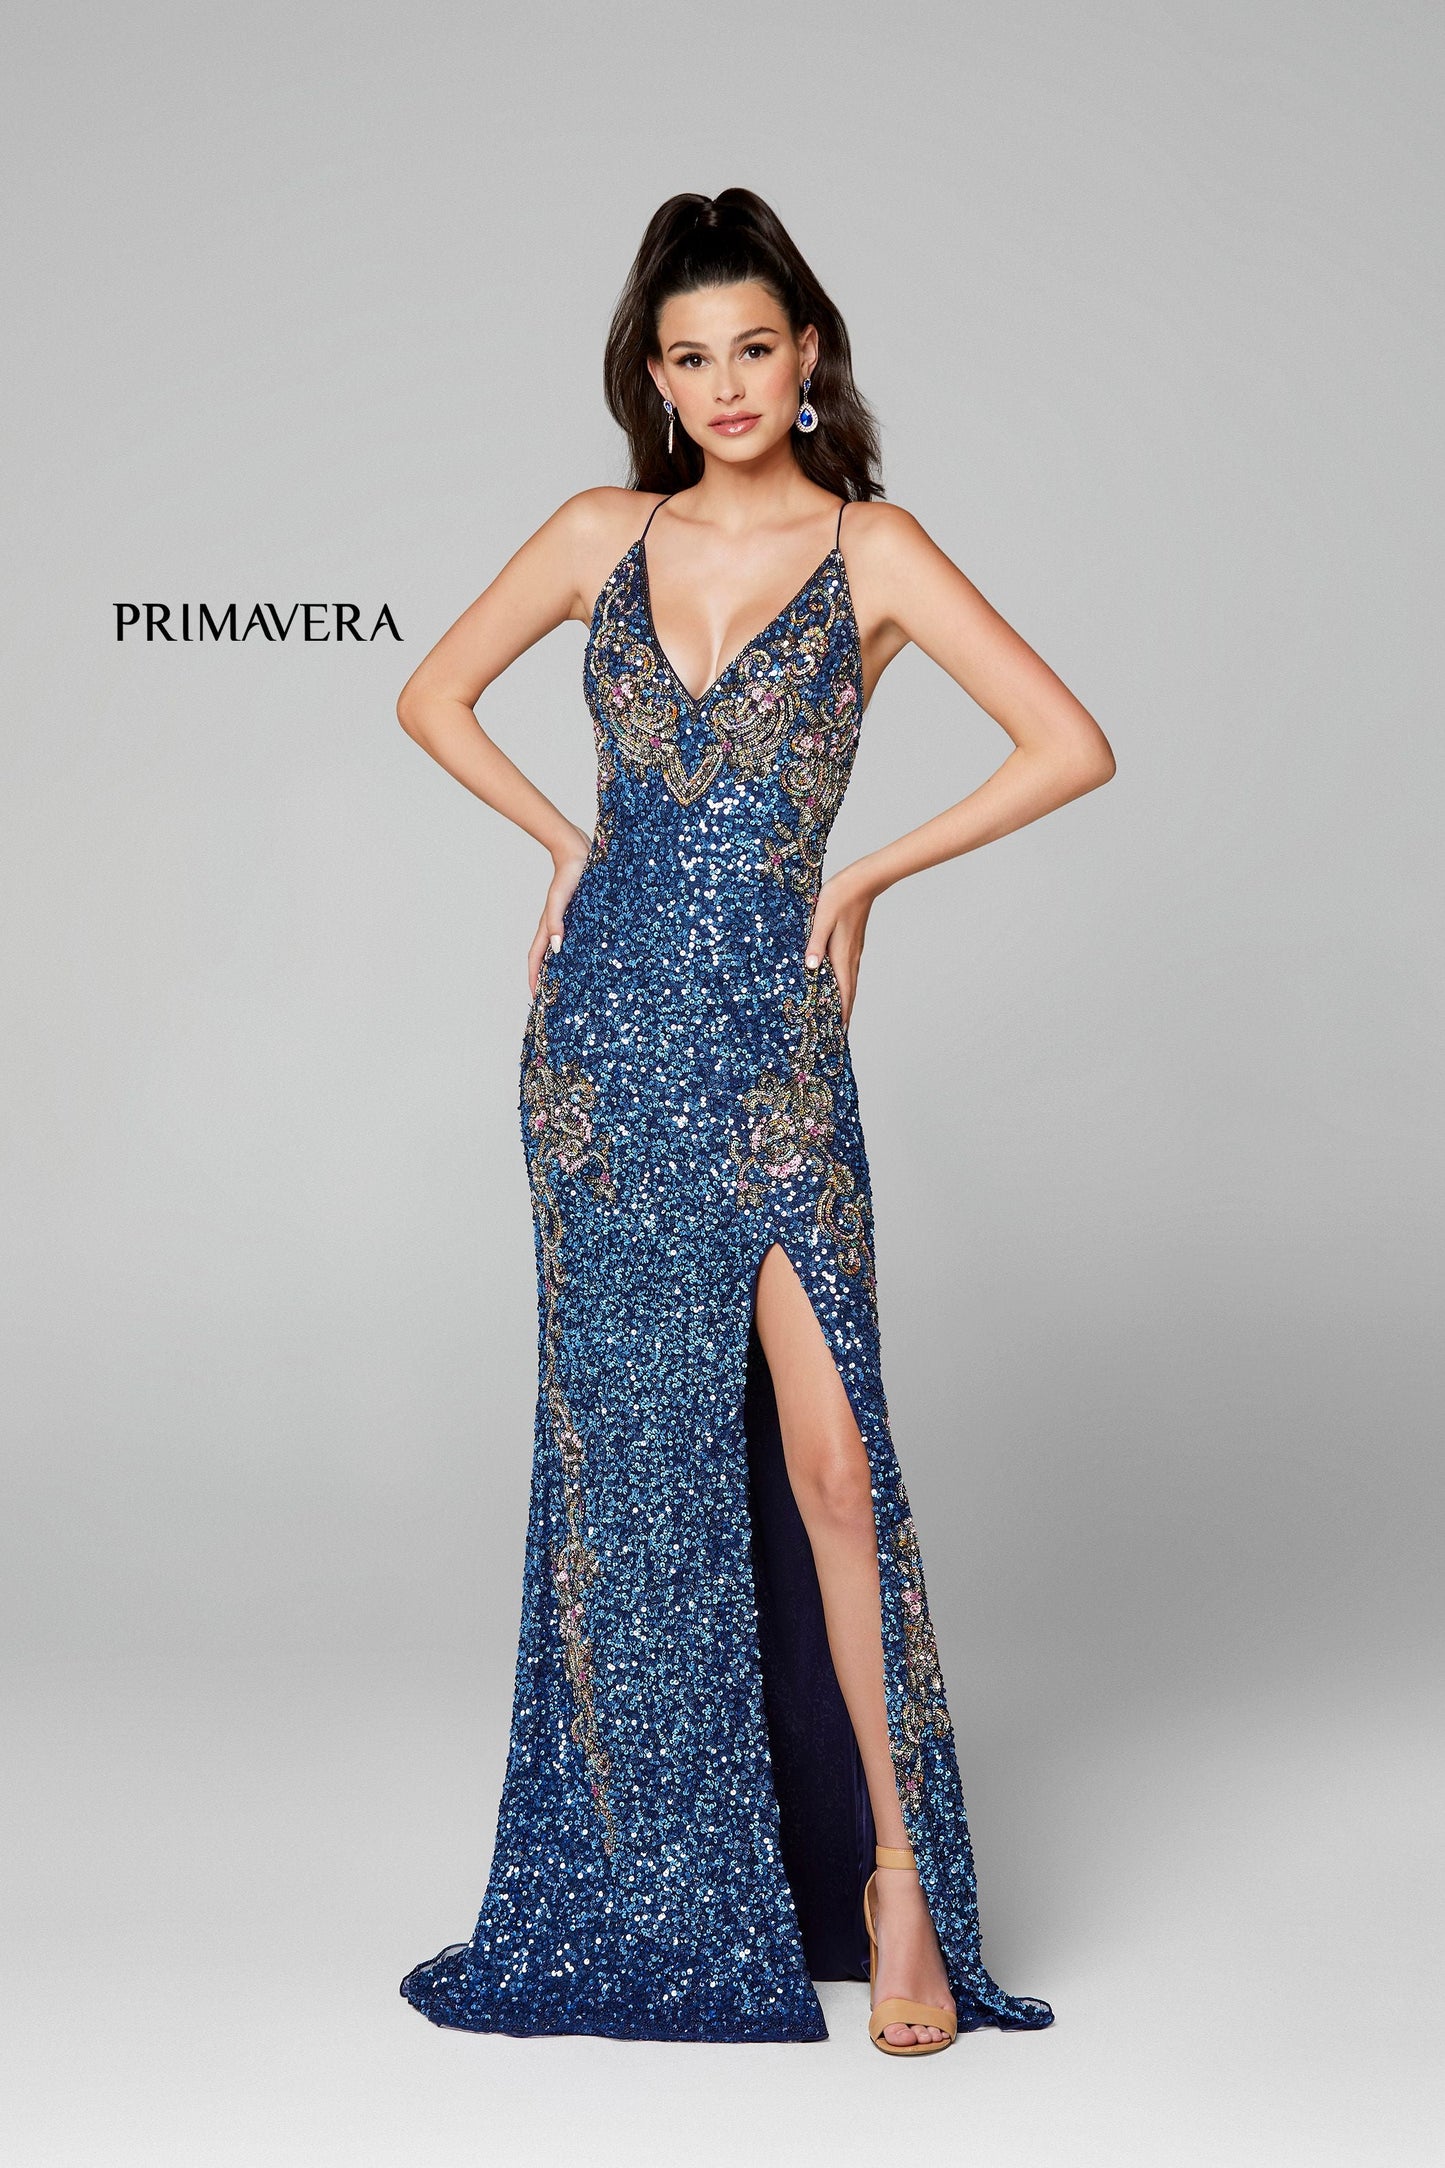 Primavera Couture 3211 size 10 Mint Sequin Prom Dress Pageant Gown Evening Formal Wear Side Slit